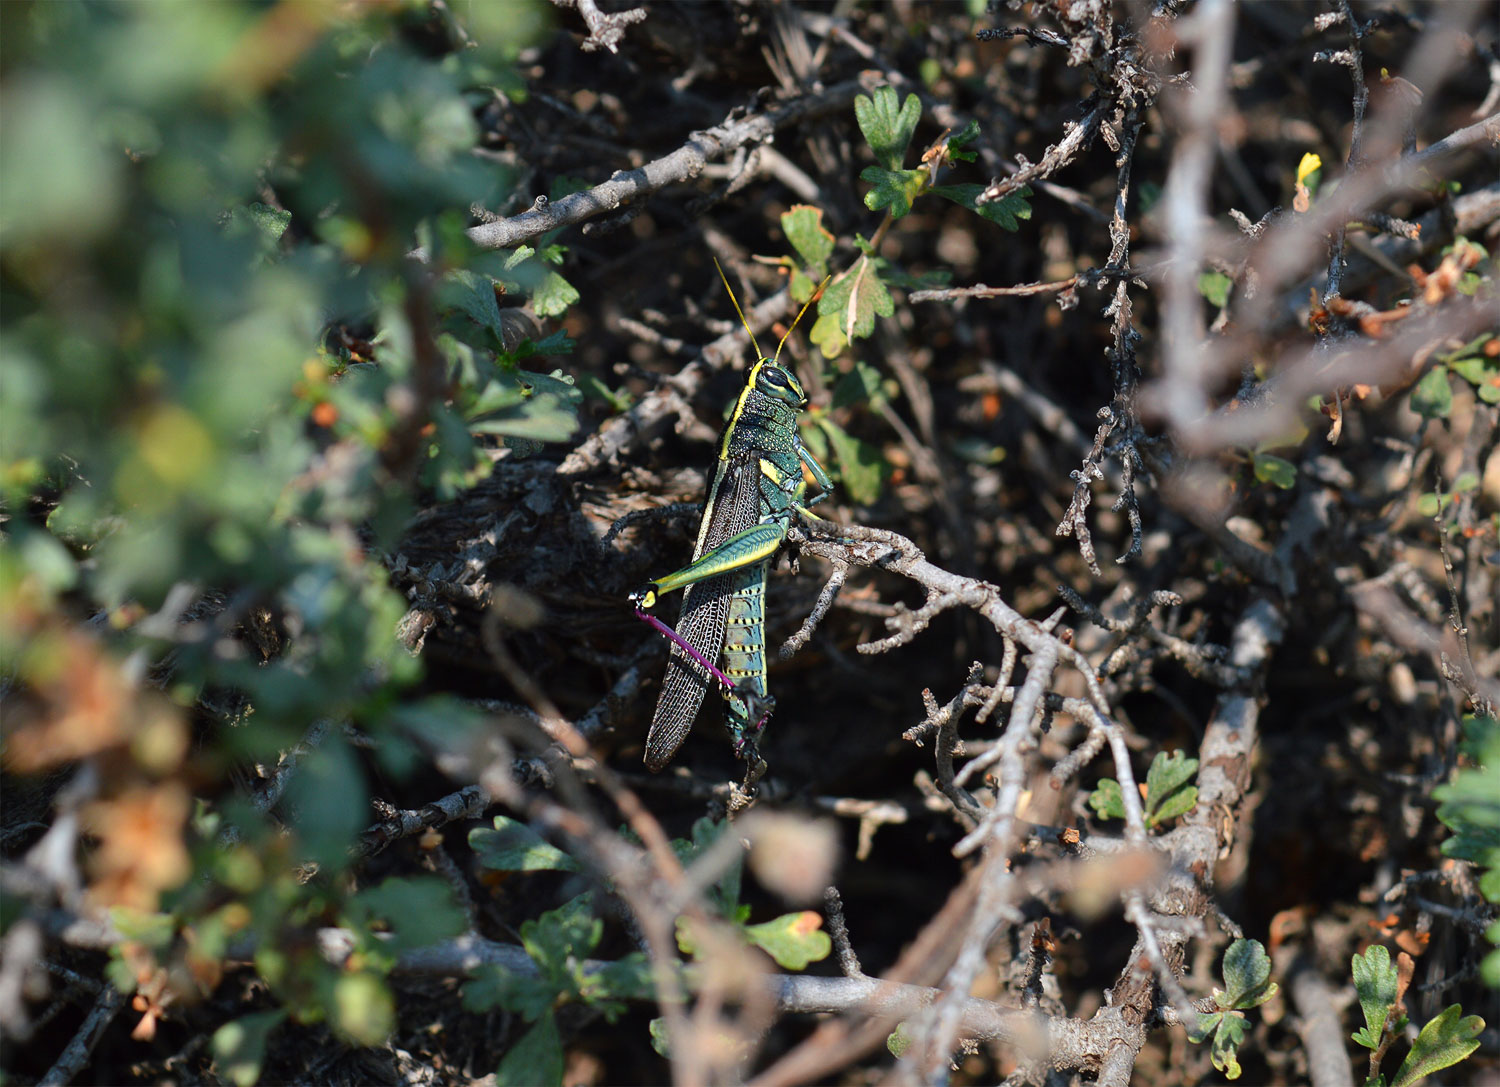 A grasshopper chirps in Craters of the Moon National Monument